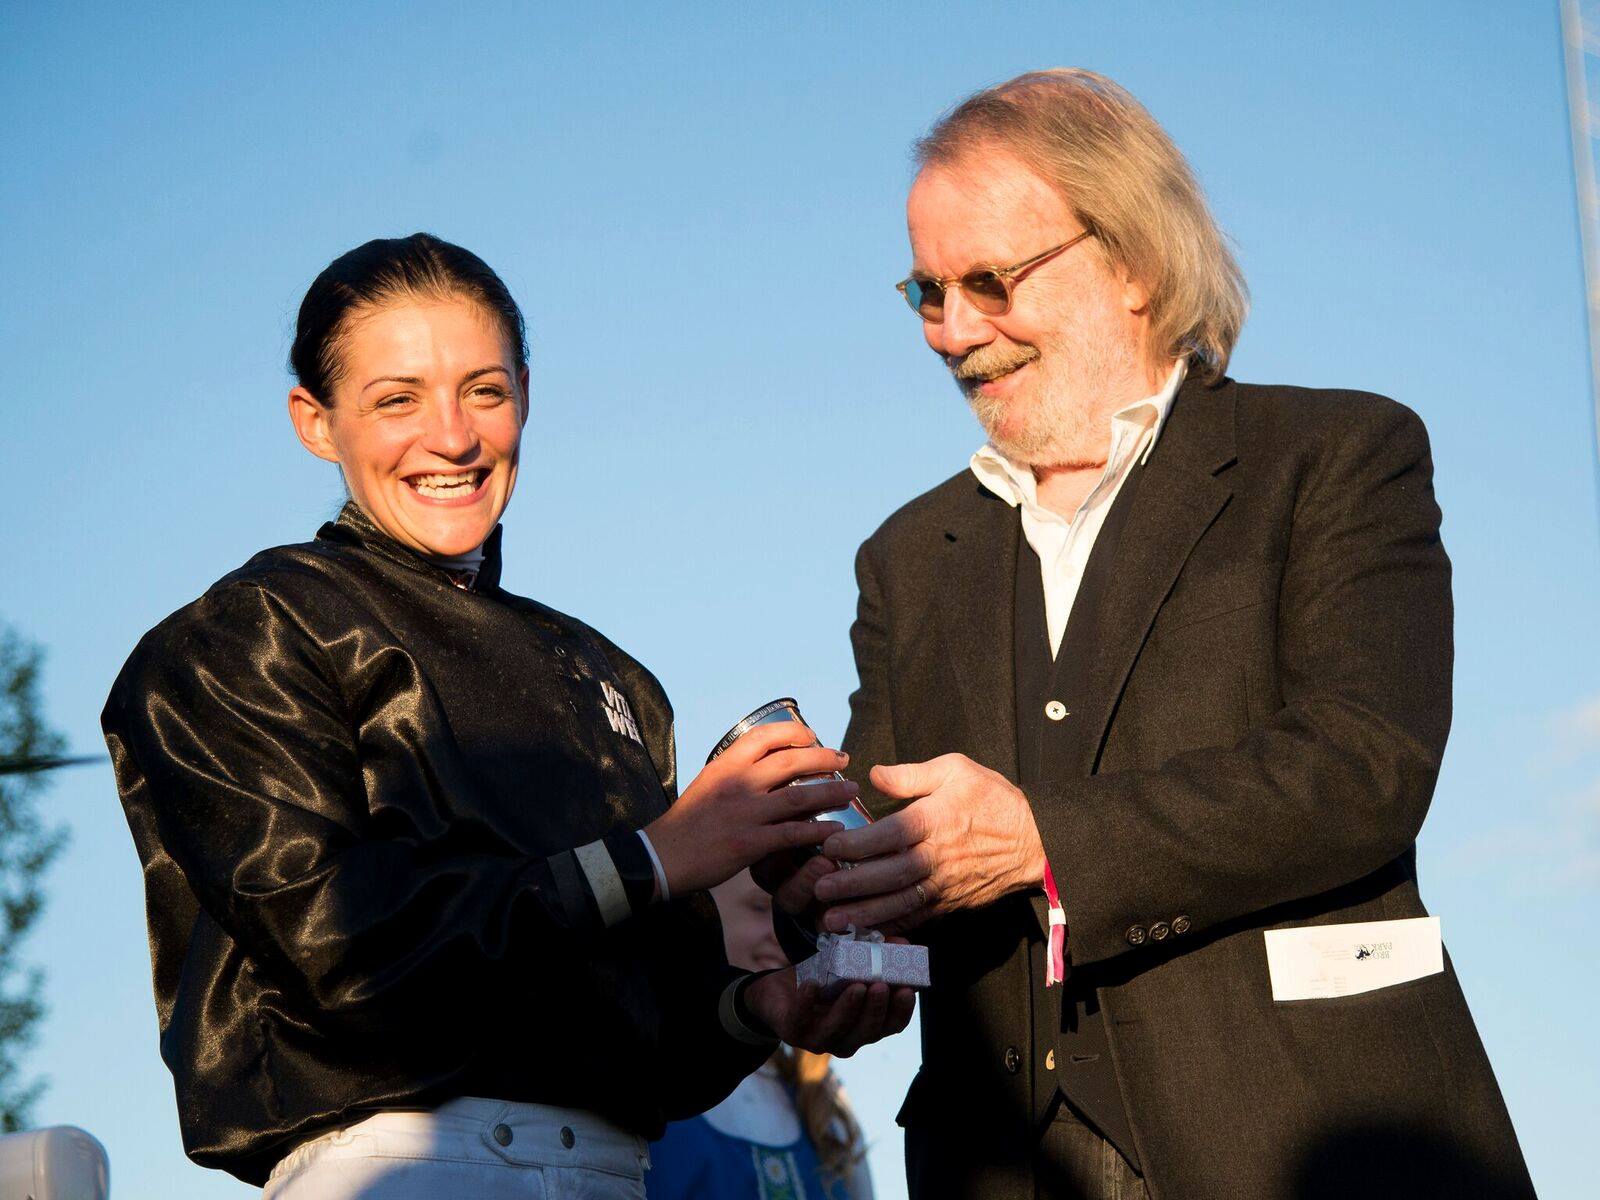 Maryline Eon receives her trophy from Benny Andersson (photo: Lady Jockeys' Thoroughbred World Championship)